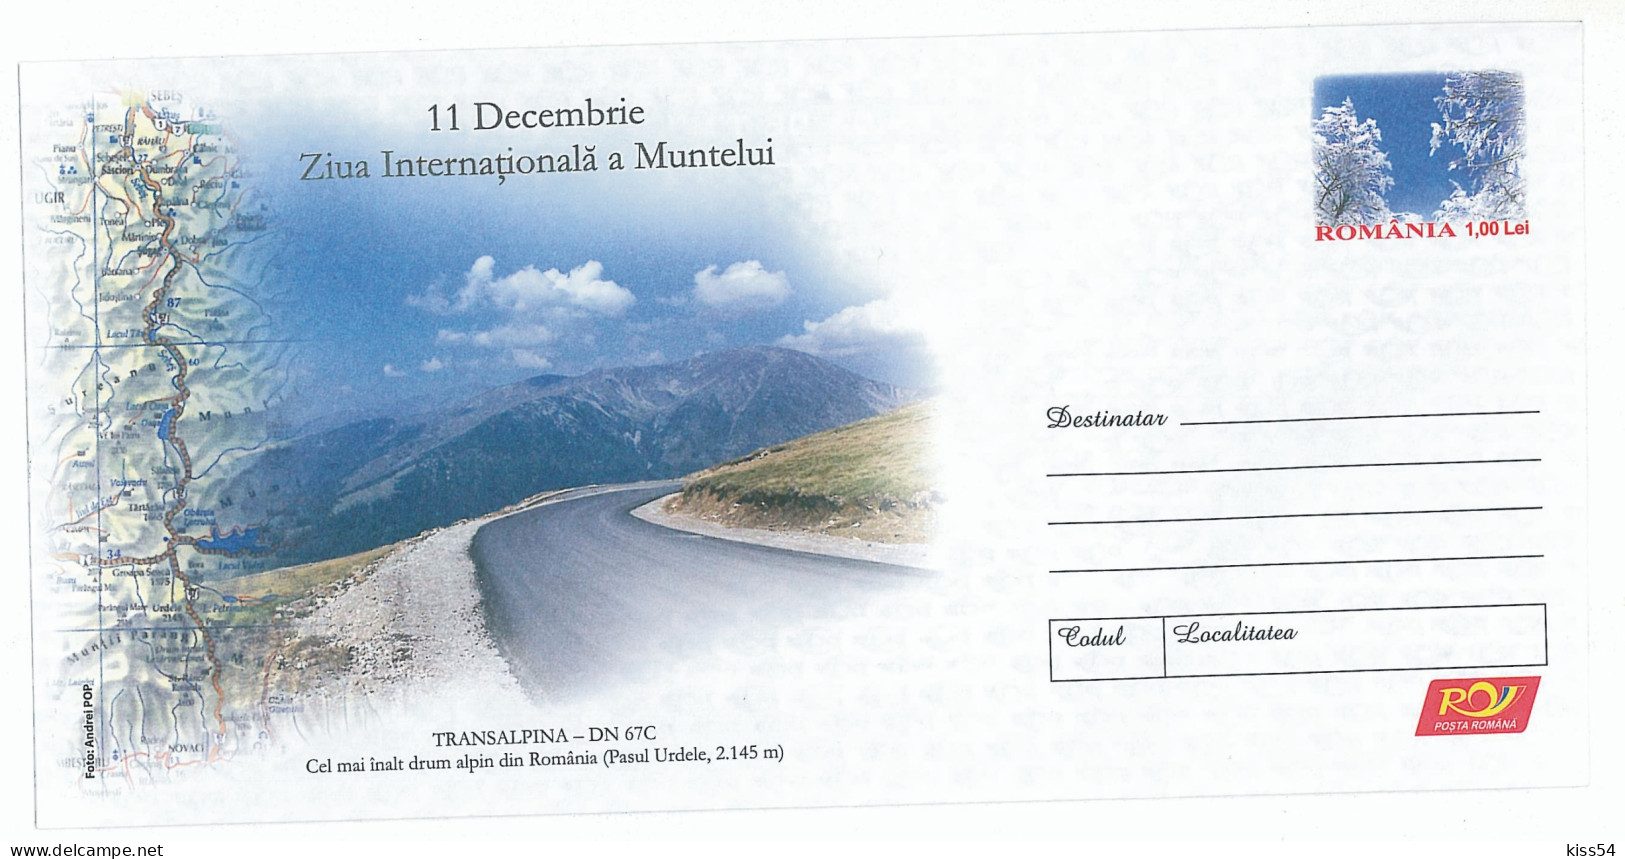 IP 2009 - 52 International Day Of The Mountain, MAP, Romania - Stationery - Unused - 2009 - Ganzsachen